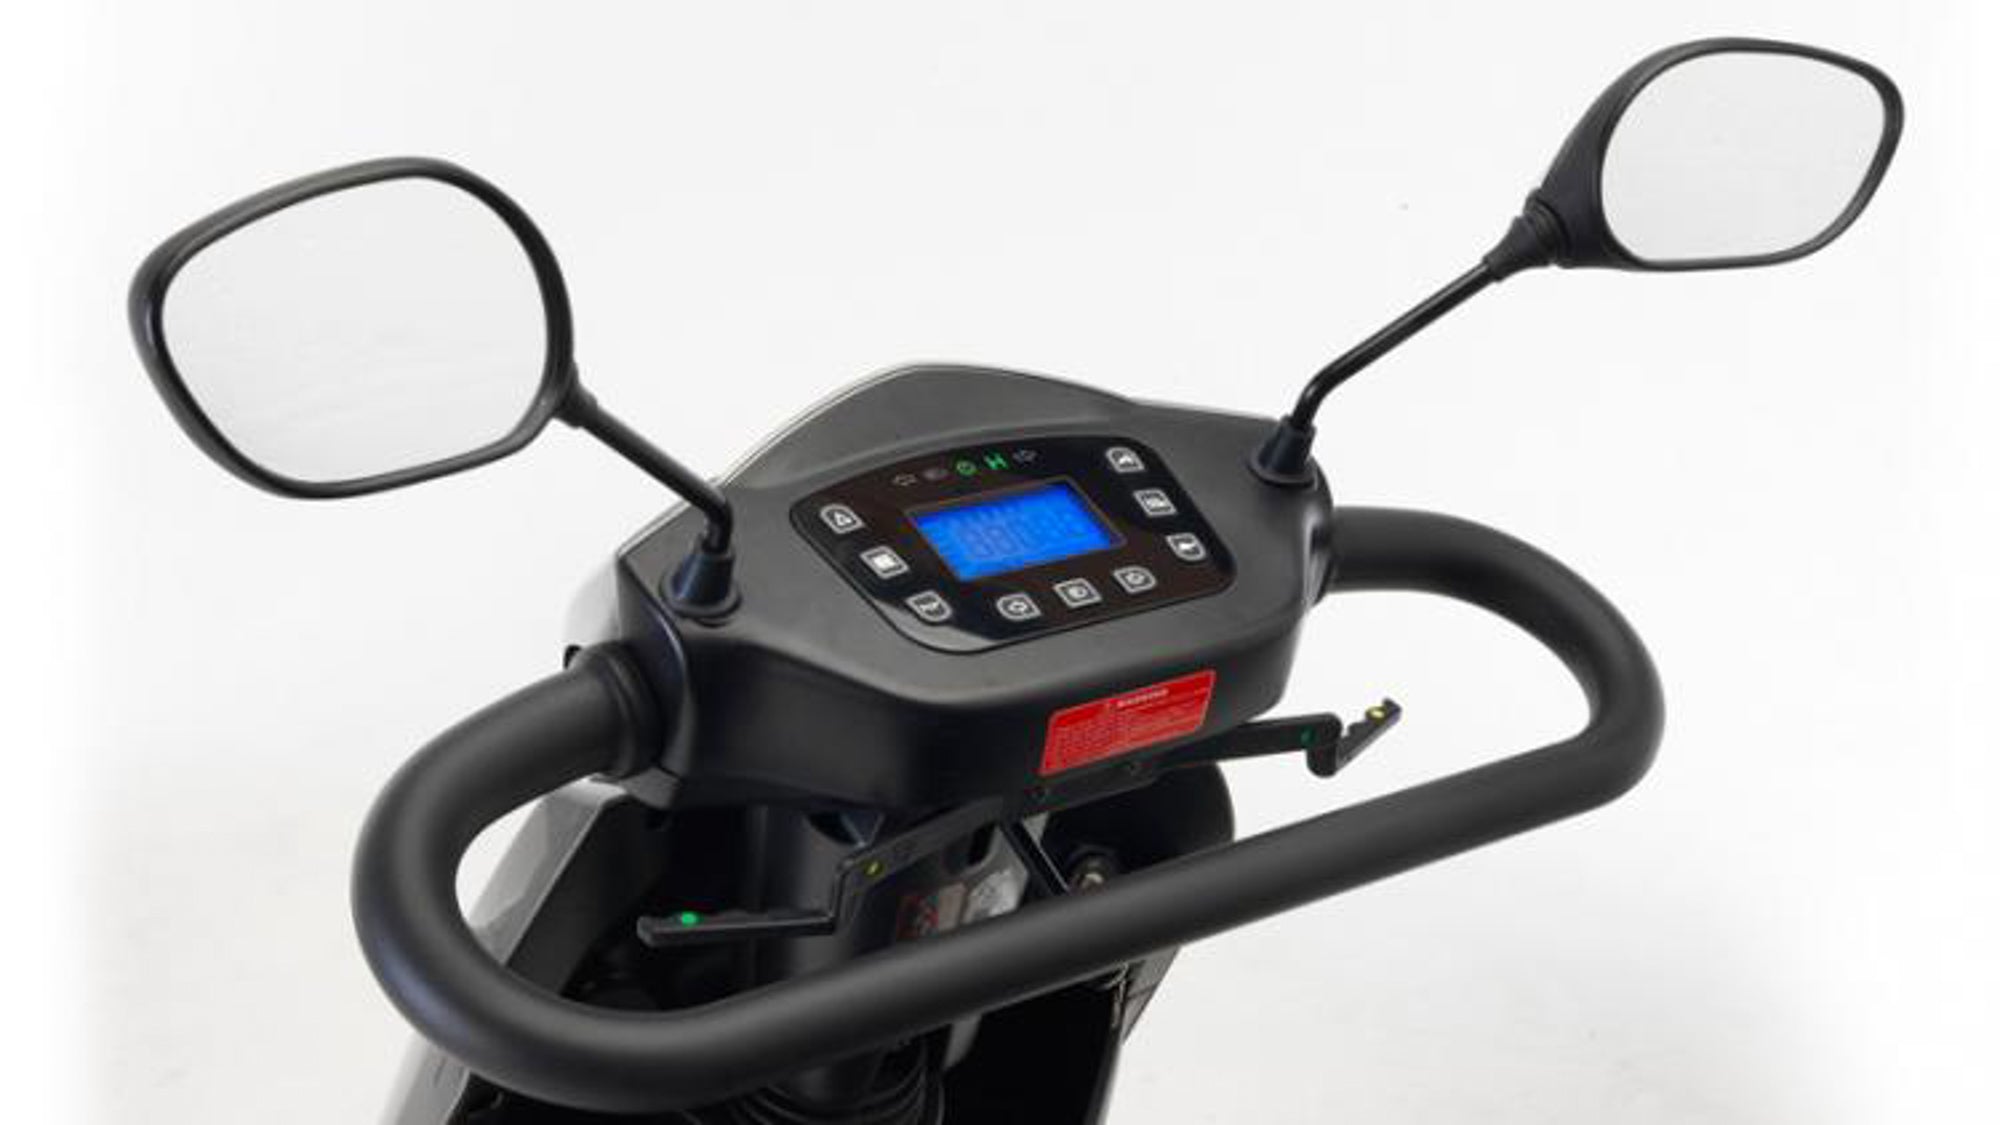 Invacare Cetus Premium High Output All Terrain Mobility Scooter Max User Weight 35st (226kg)